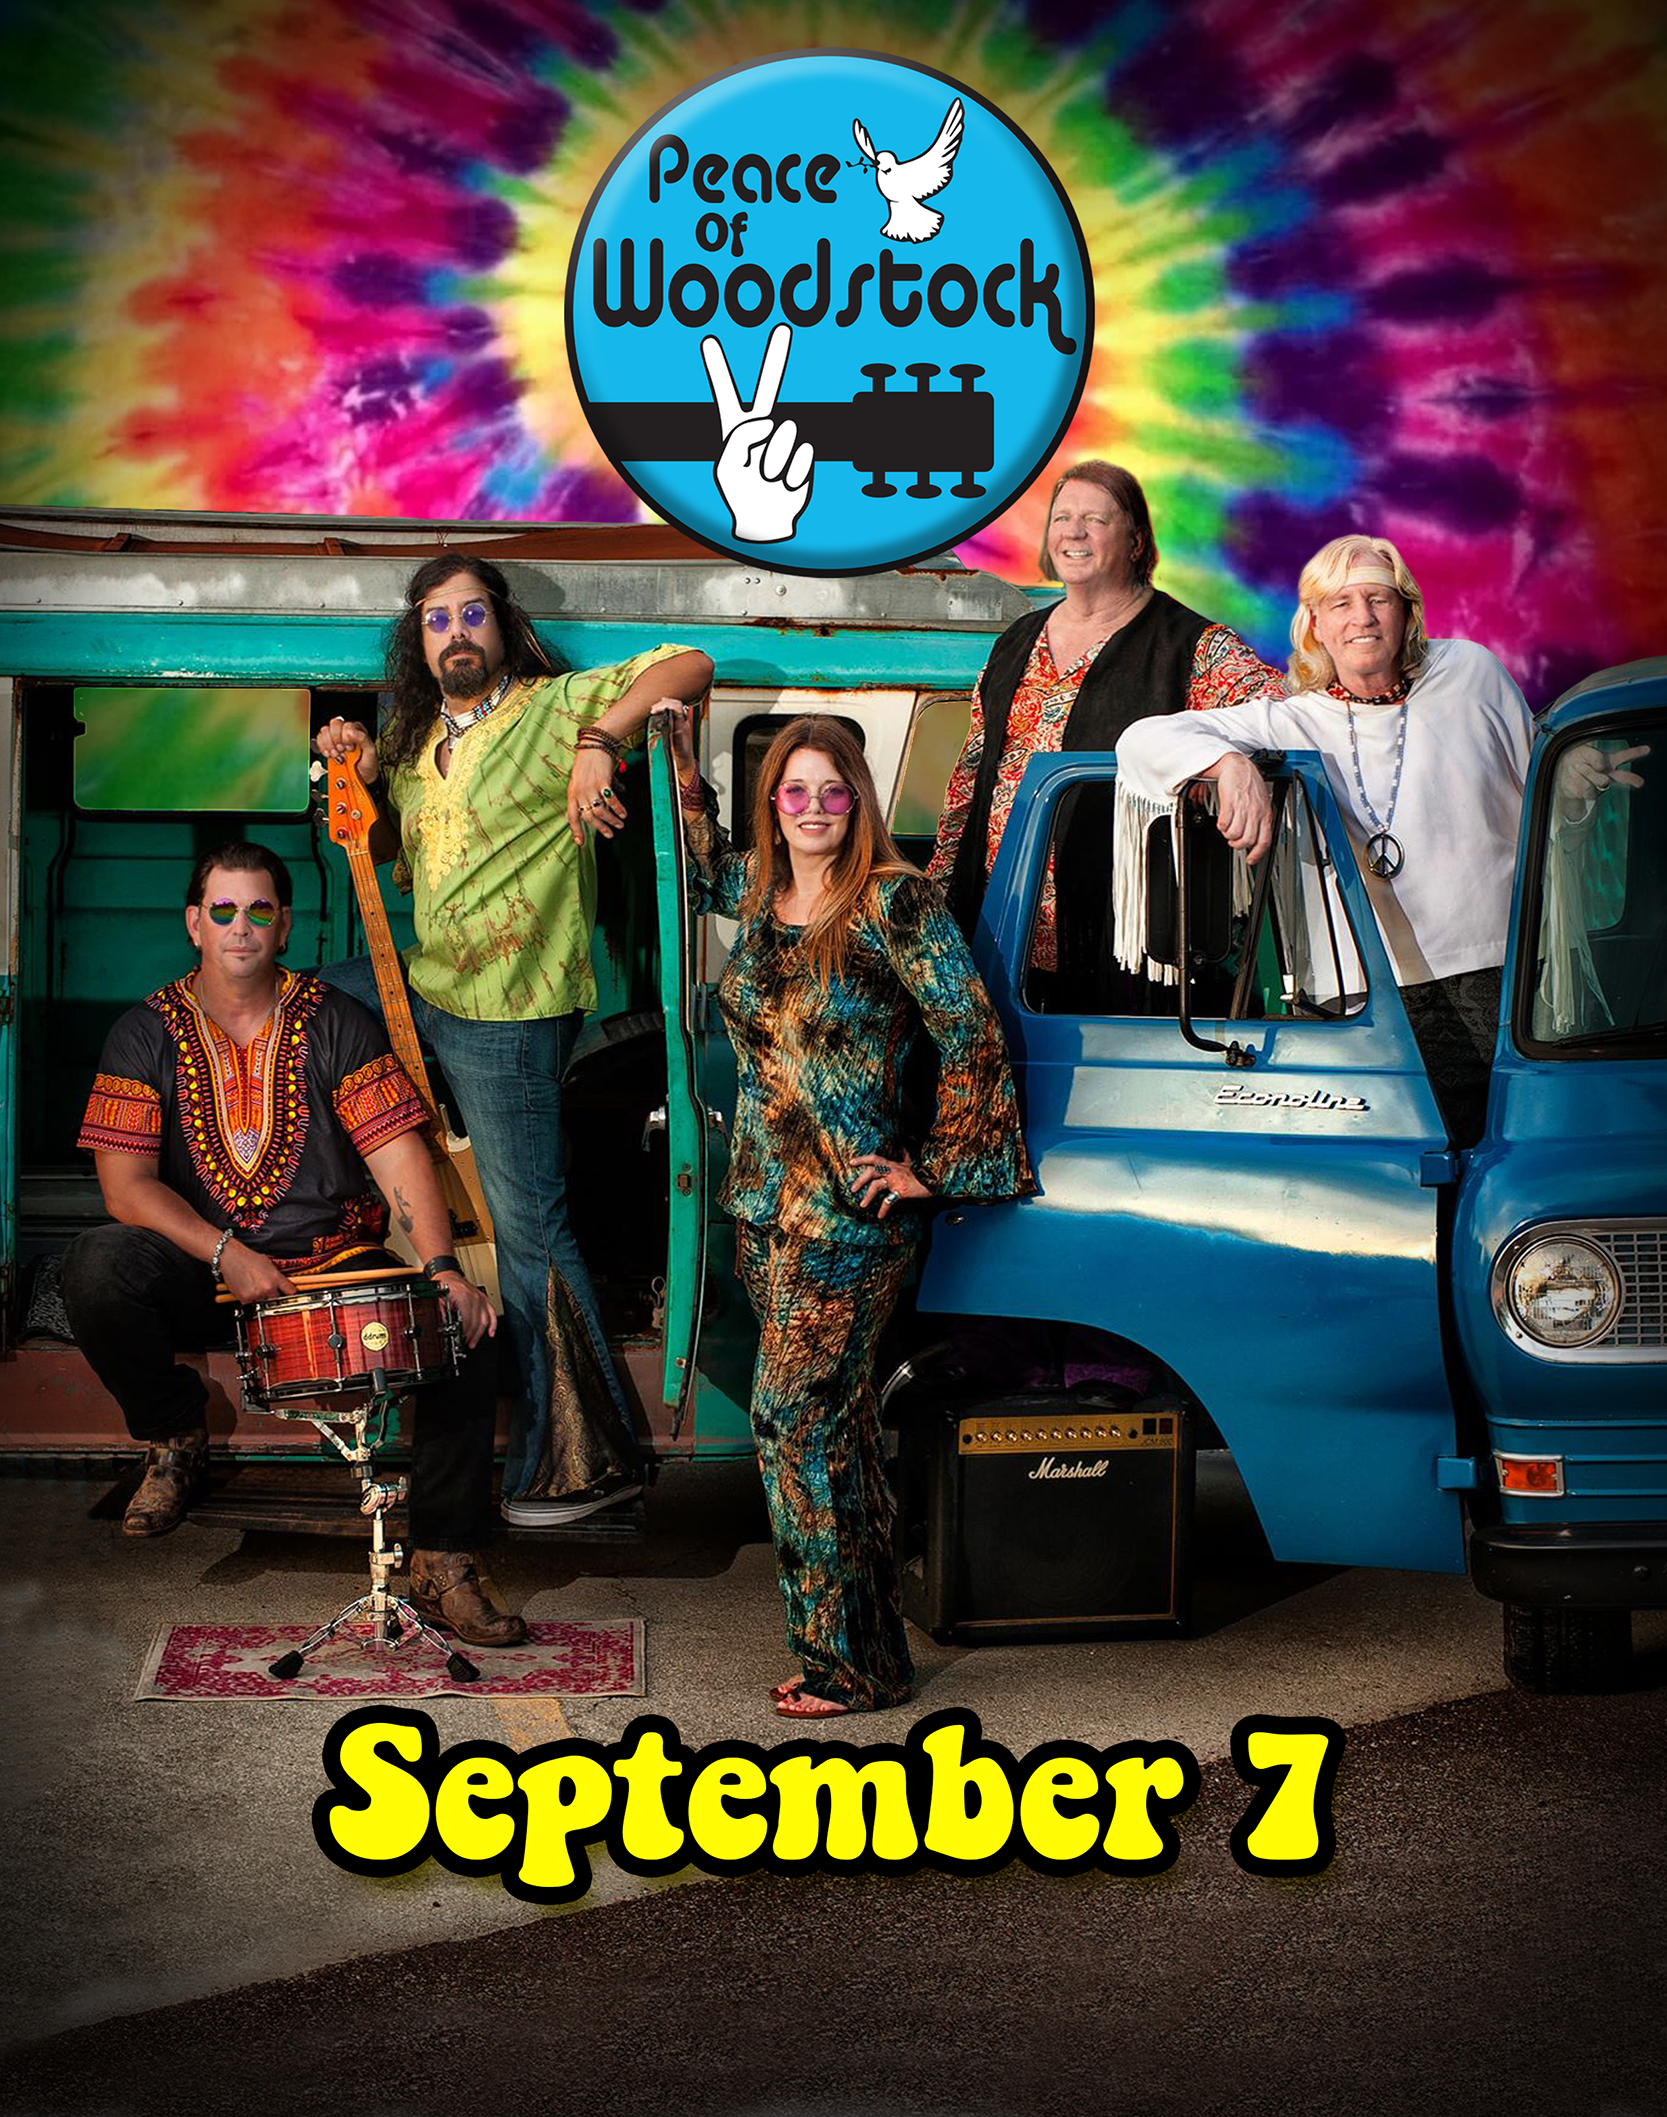 Peace of Woodstock, A tribute to the music of Woodstock on September 7th